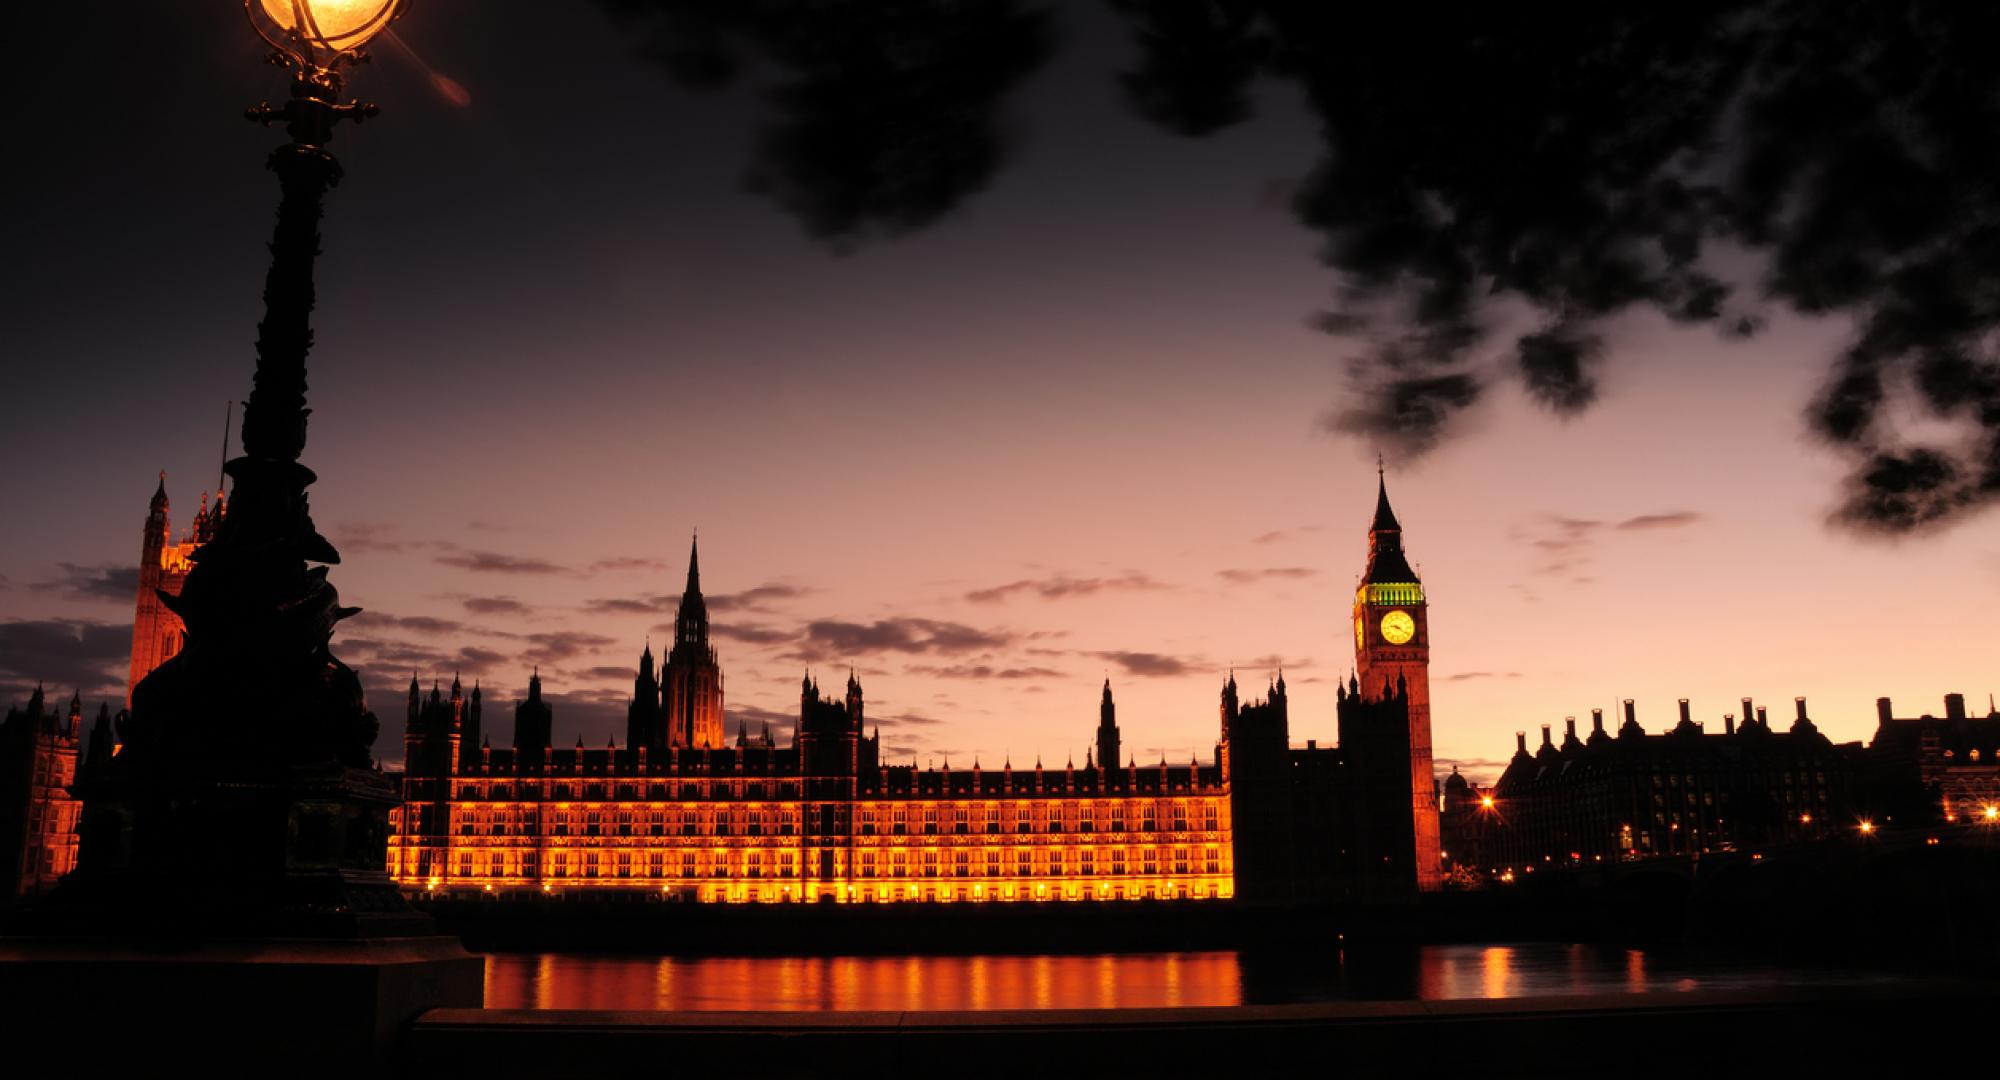 Houses of Parliament at sunset